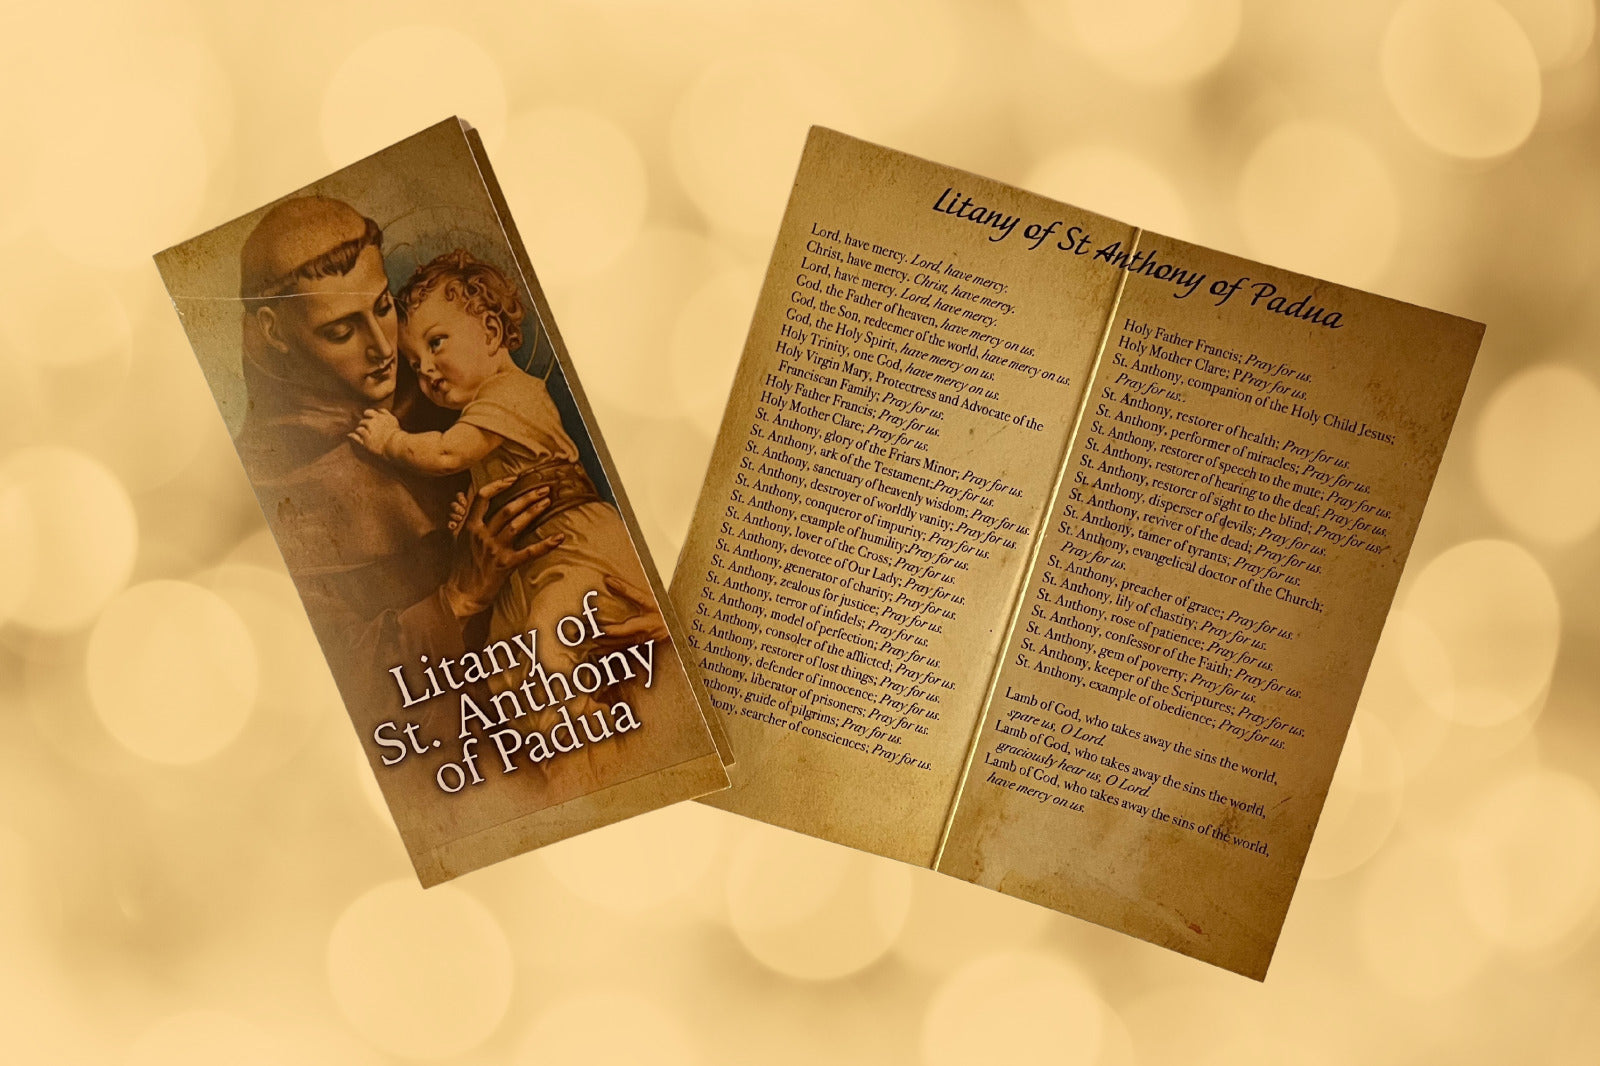 3 Pack Litany of Saint Anthony of Padua - Bob and Penny Lord